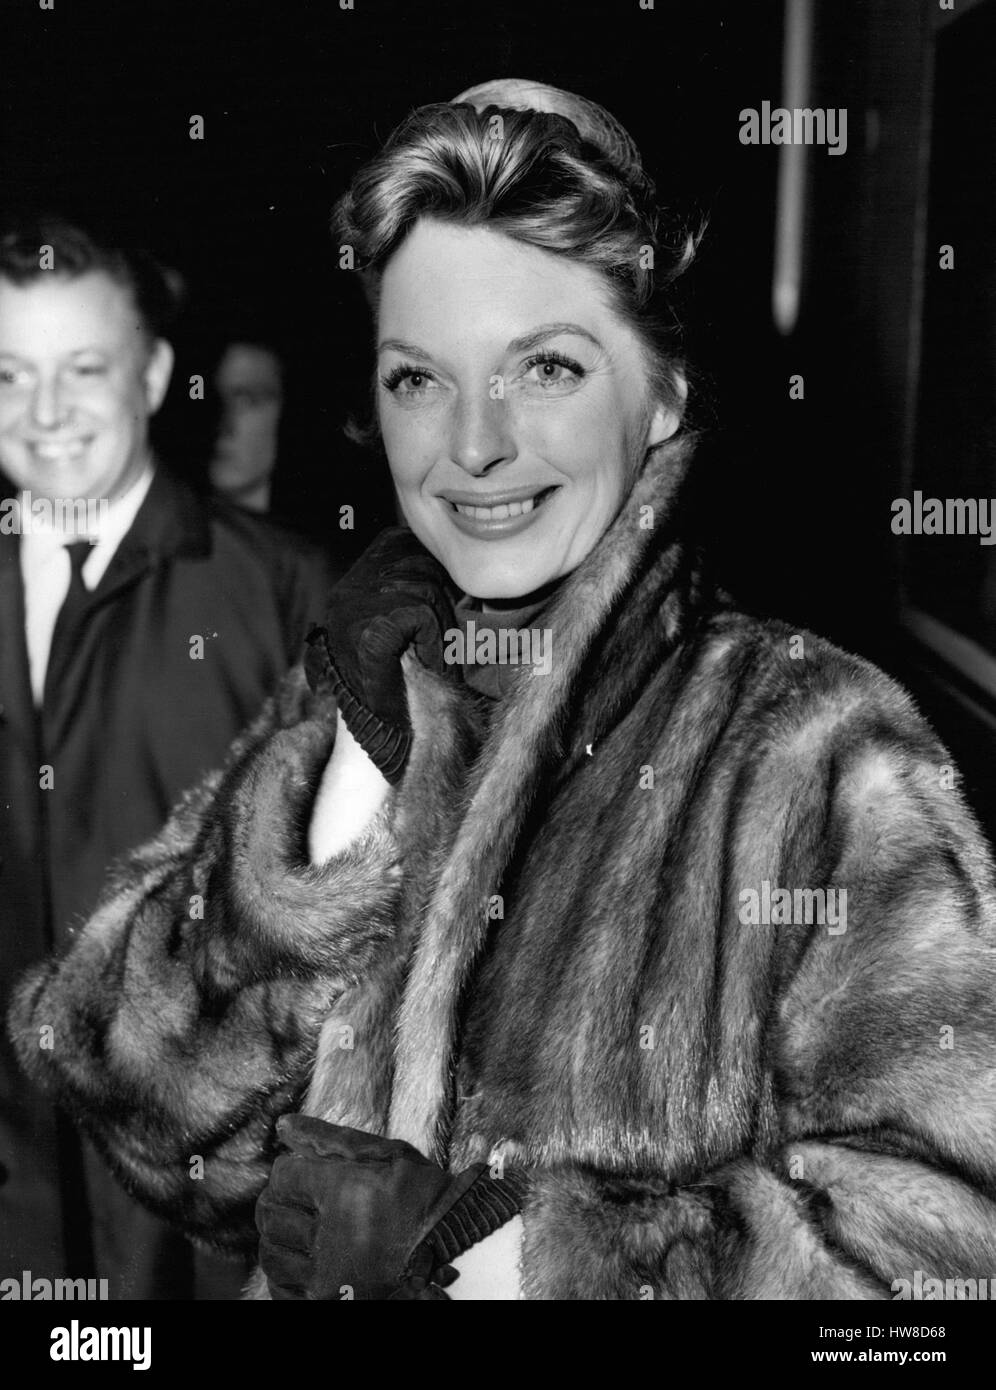 Nov. 11, 1957 - American Singing Star Arrives In London julie london At paddington: Julie London popular American singing star and her two children Lisa (5) and Stacy(8) arrived in London this morning- from the United States. She is to make her first British film here ''The Question of Adultery''. Photo shows. Julie London on her arrival at Paddington this afternoon. (Credit Image: © Keystone Press Agency/Keystone USA via ZUMAPRESS.com) Stock Photo